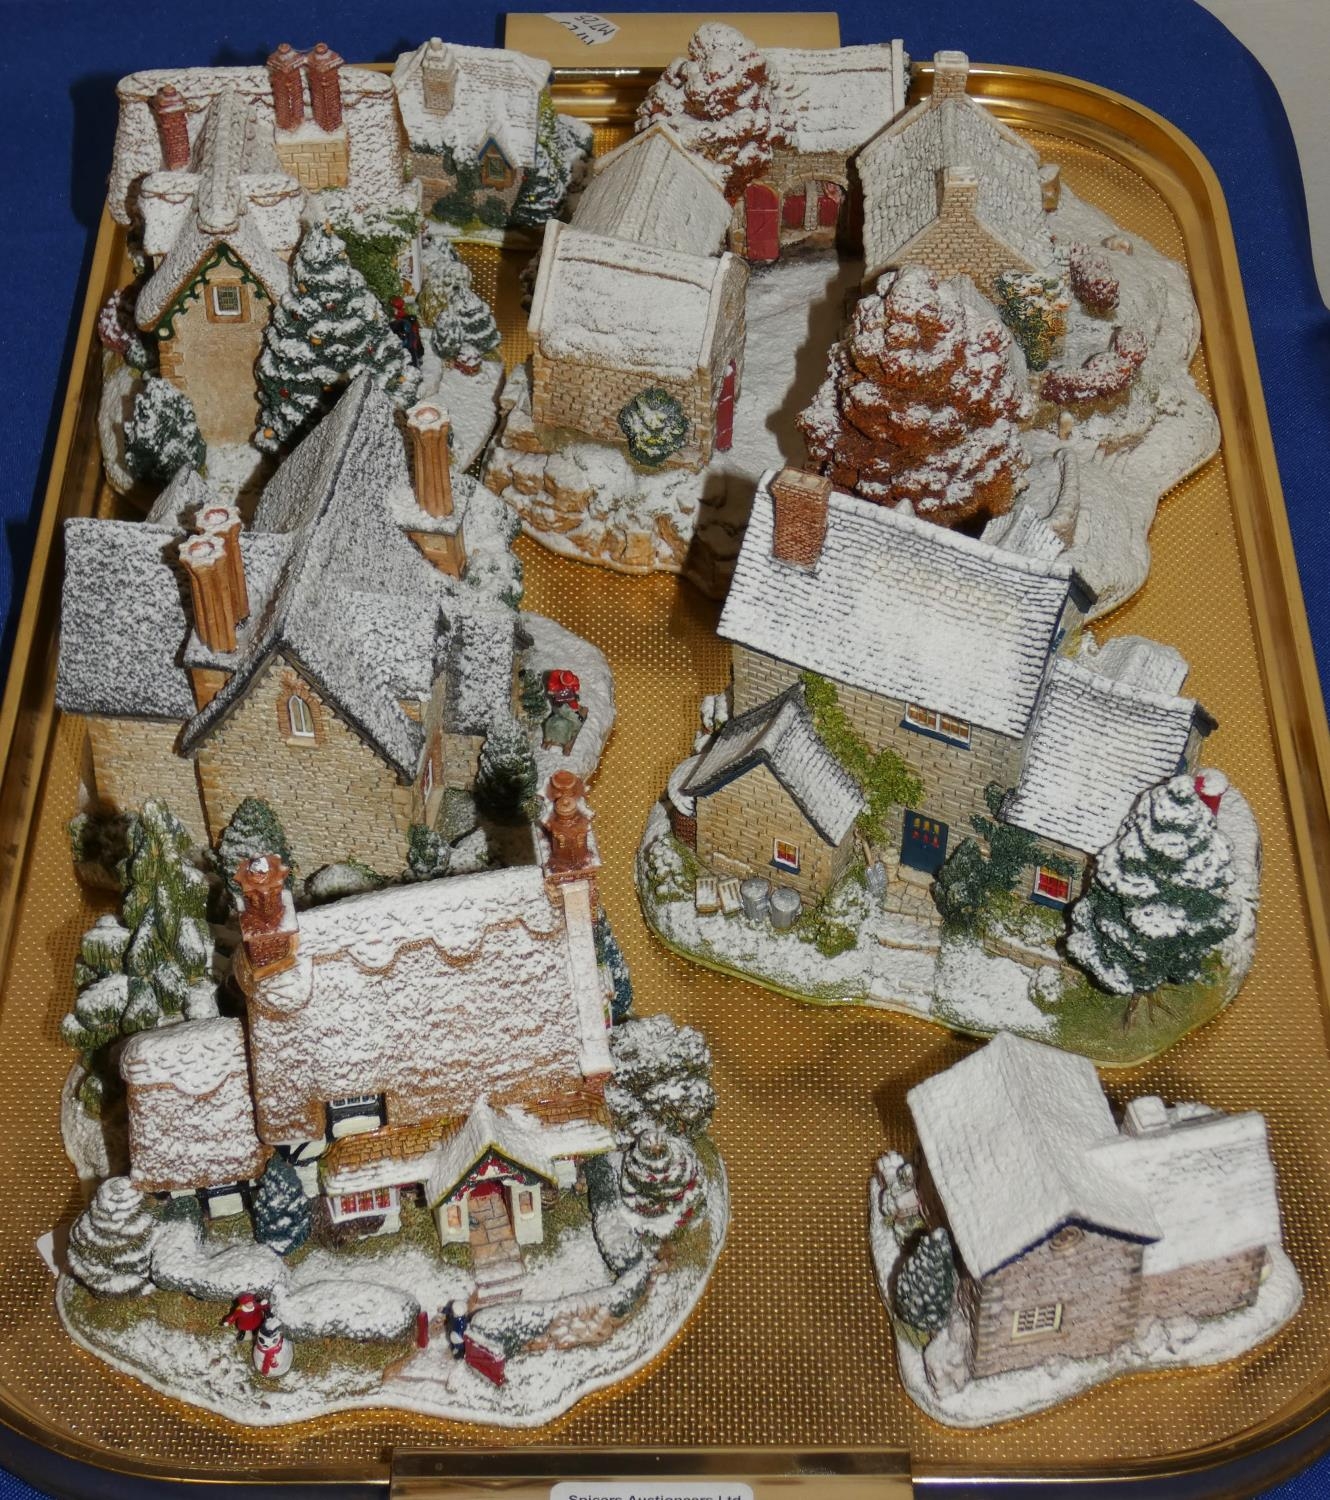 A collection of Lilliput Lane Christmas cottages, including